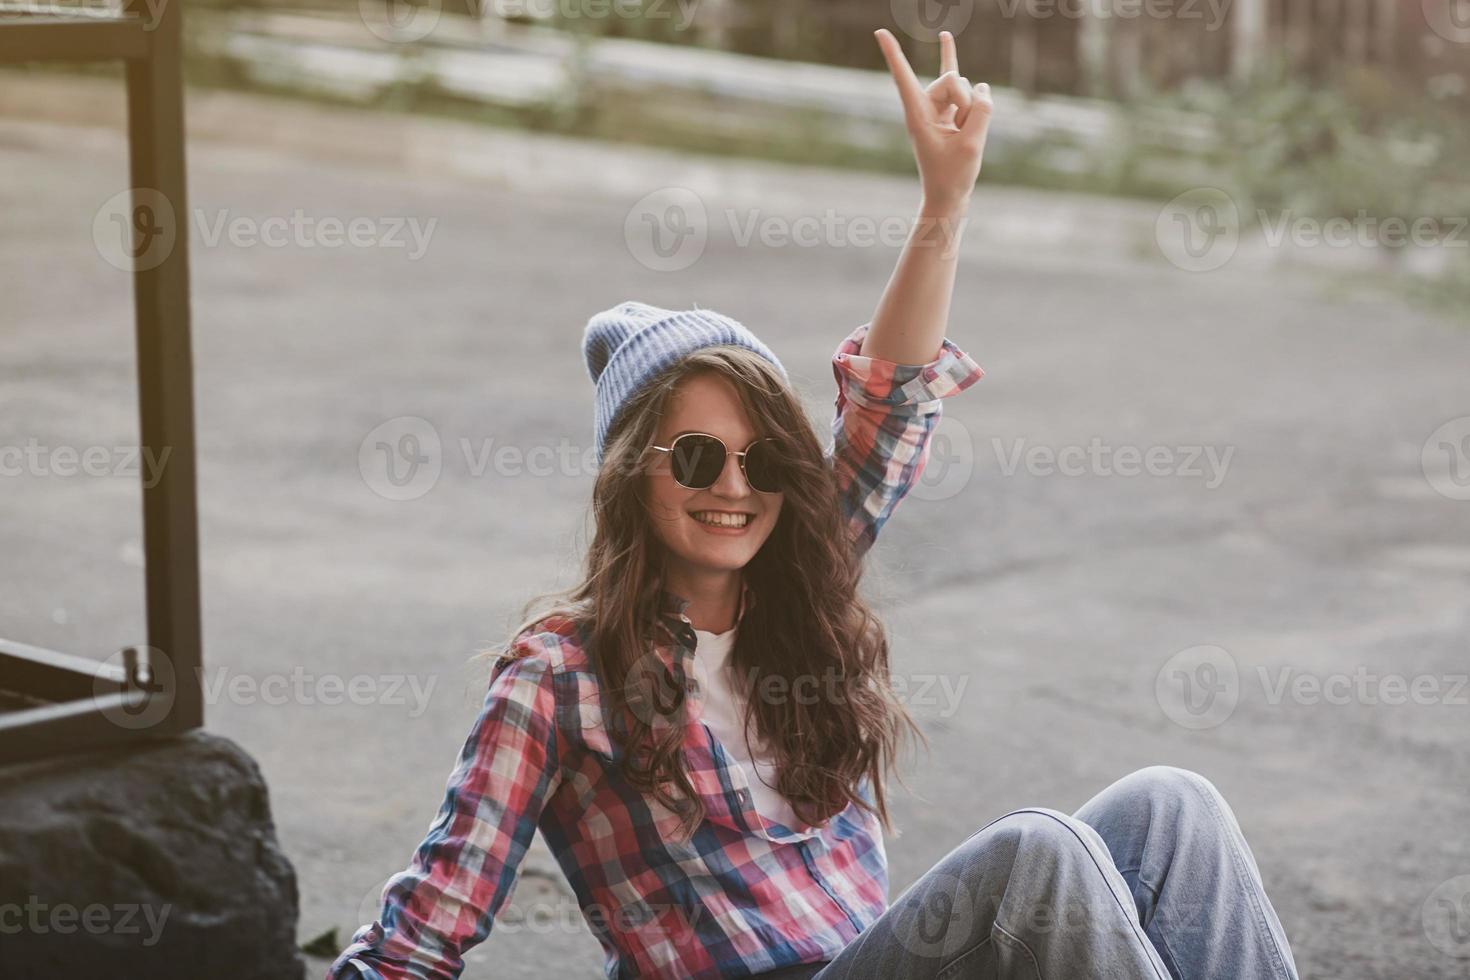 hipster woman smiling in urban background photo